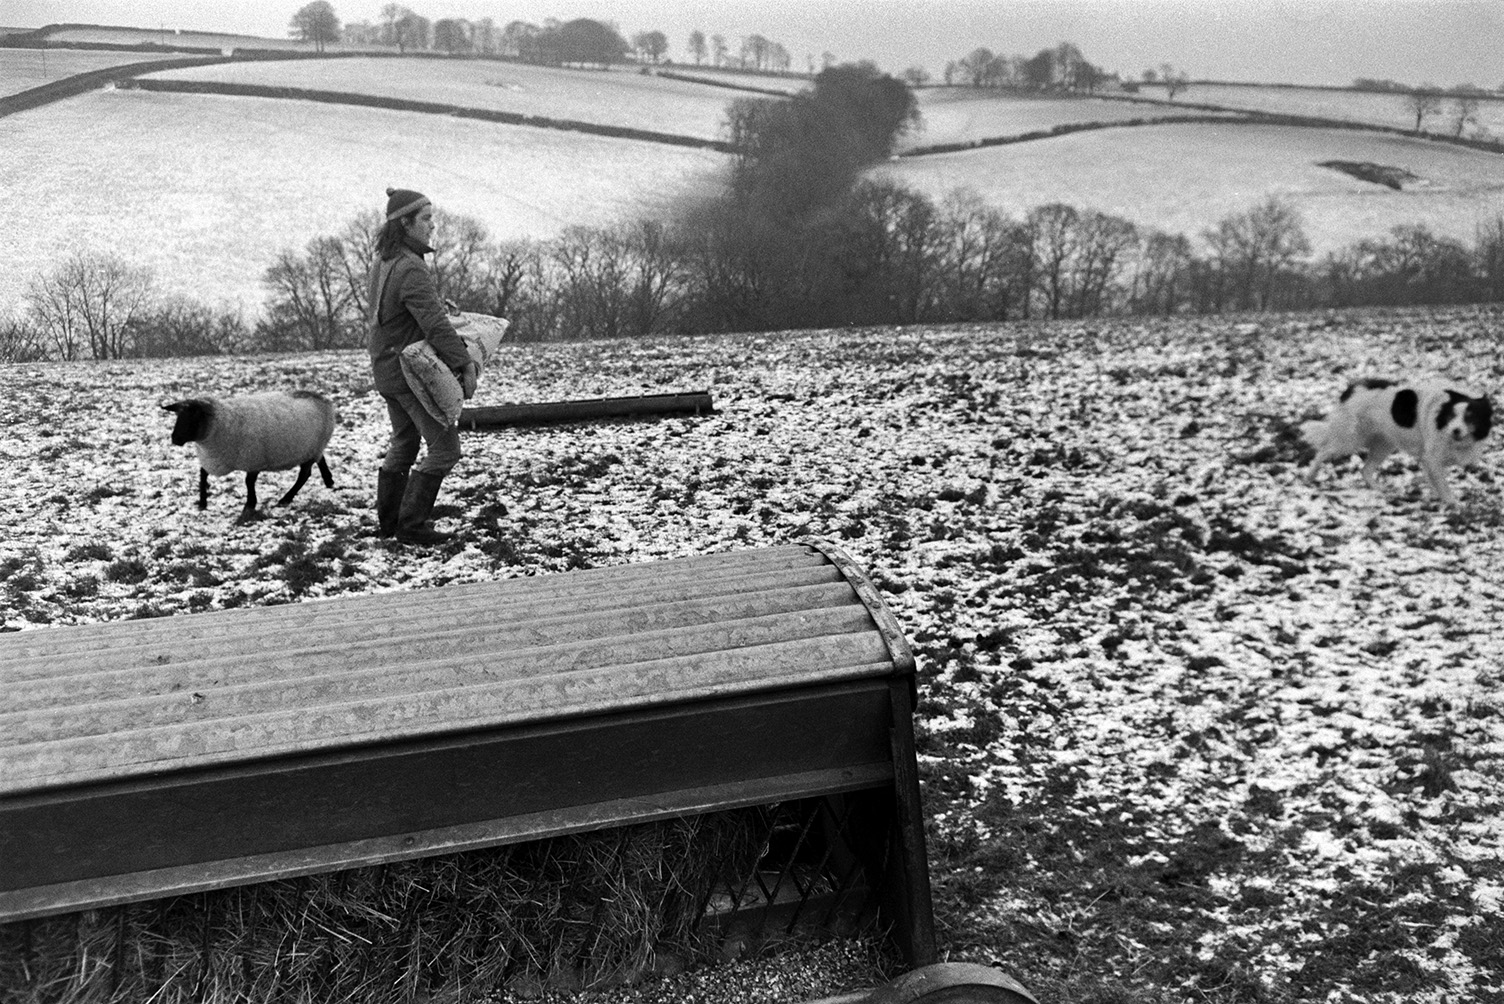 Derek Bright feeding sheep in a snow covered field at Mill Road Farm, Beaford. He is carrying a sack of feed to a trough. A dog is with him and a hay rack is visible in the foreground. More snow covered fields, trees and hedgerows can be seen in the background. The farm was also known as Jeffrys.